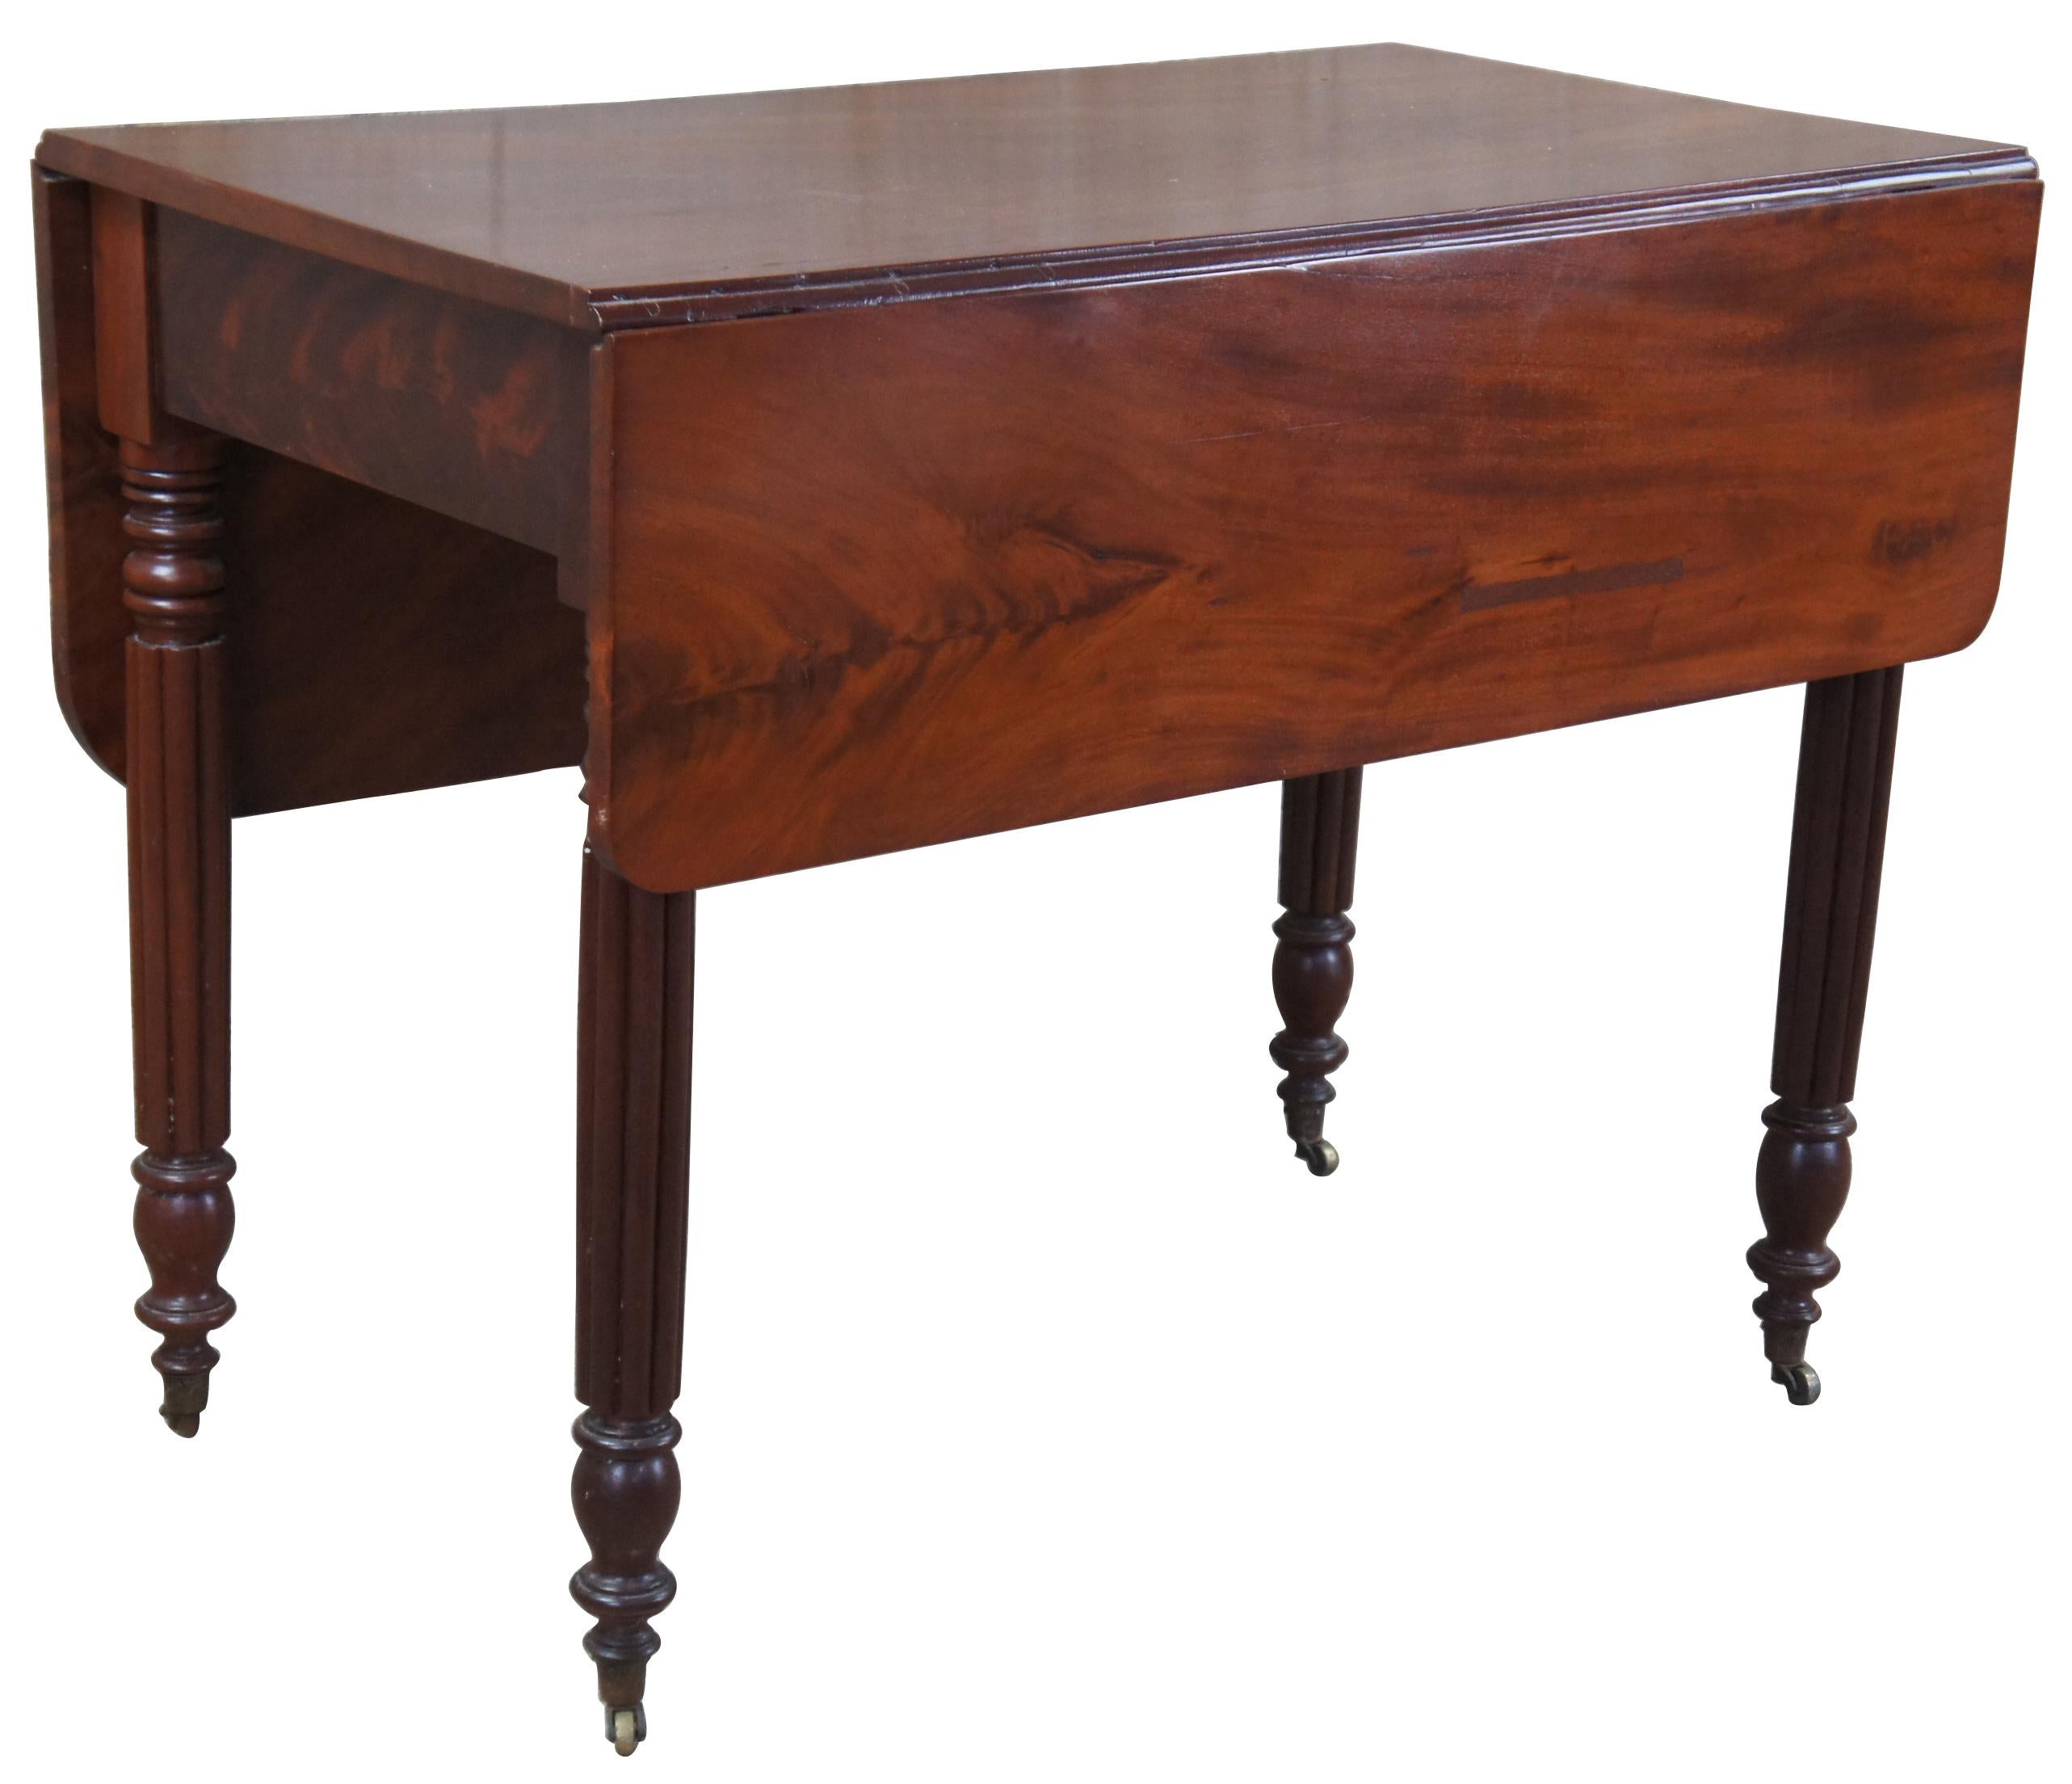 American Empire style table by Weber Furniture of Chicago, Illinois. Handmade from flame mahogany. Features a unique drop leaf with two different sized leaves, reeded legs and arrow feet over petite casters.
   